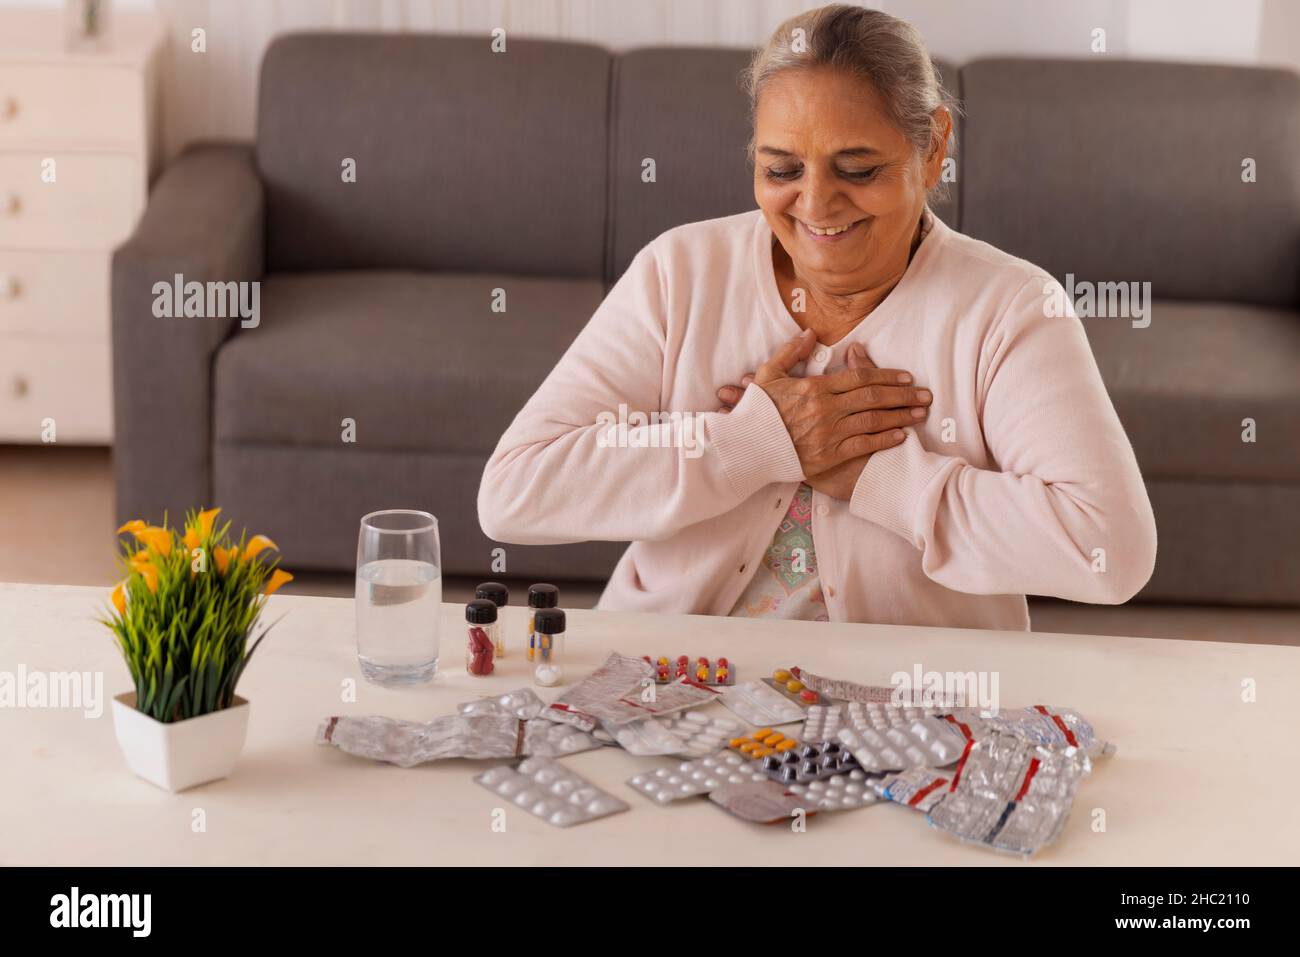 Old woman going to take medicine kept on centre table Stock Photo